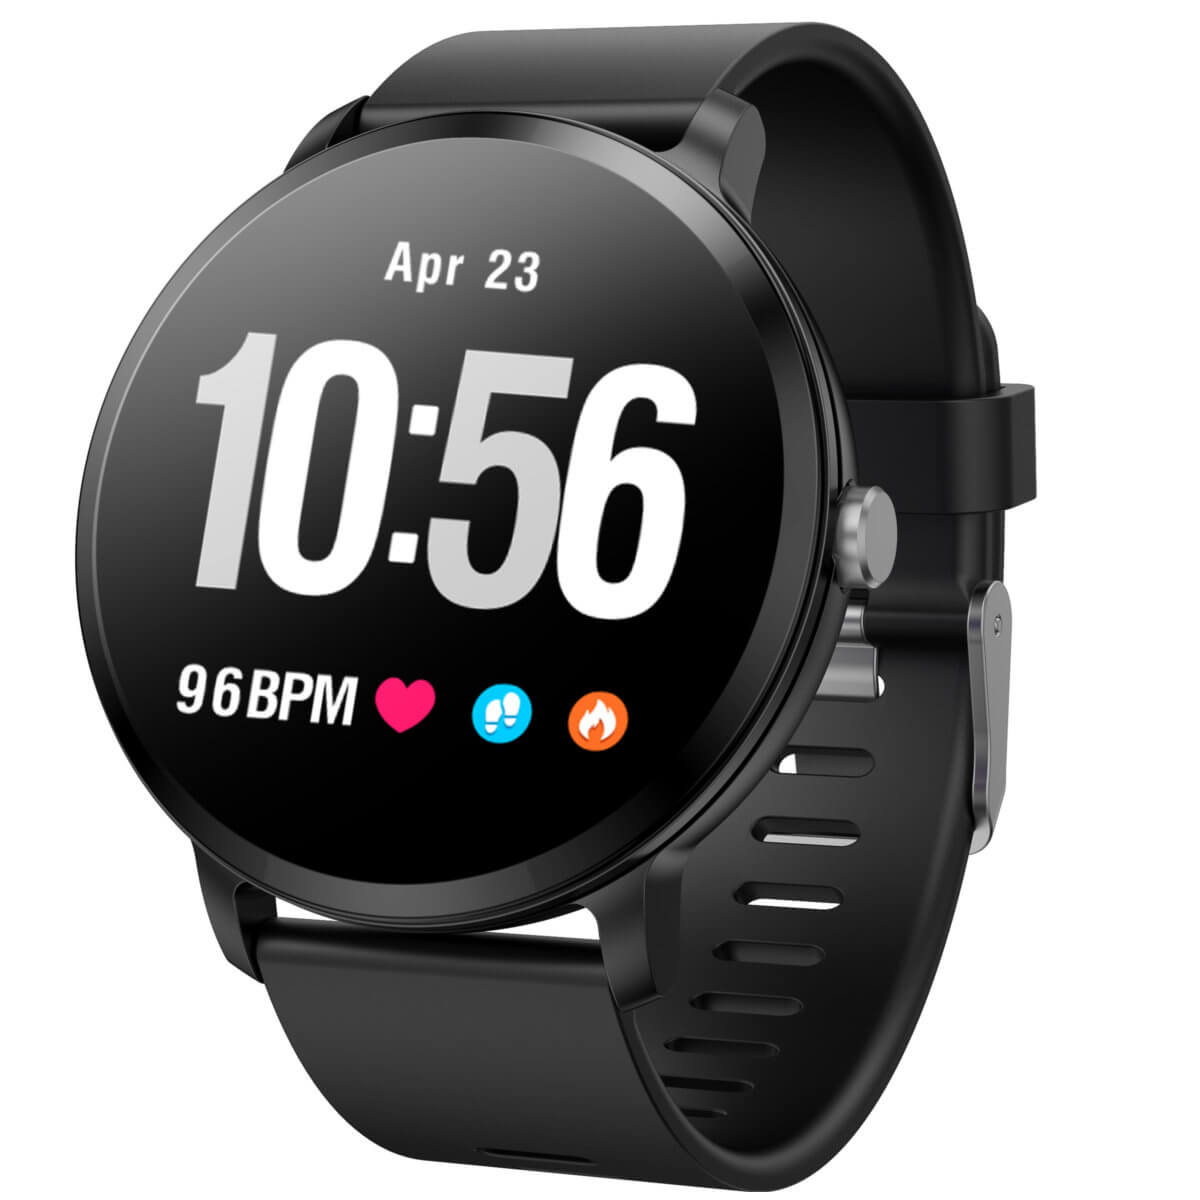 V11 smart watch 1.3 inch color round screen, heart rate and blood pressure monitoring IP67-android ios app